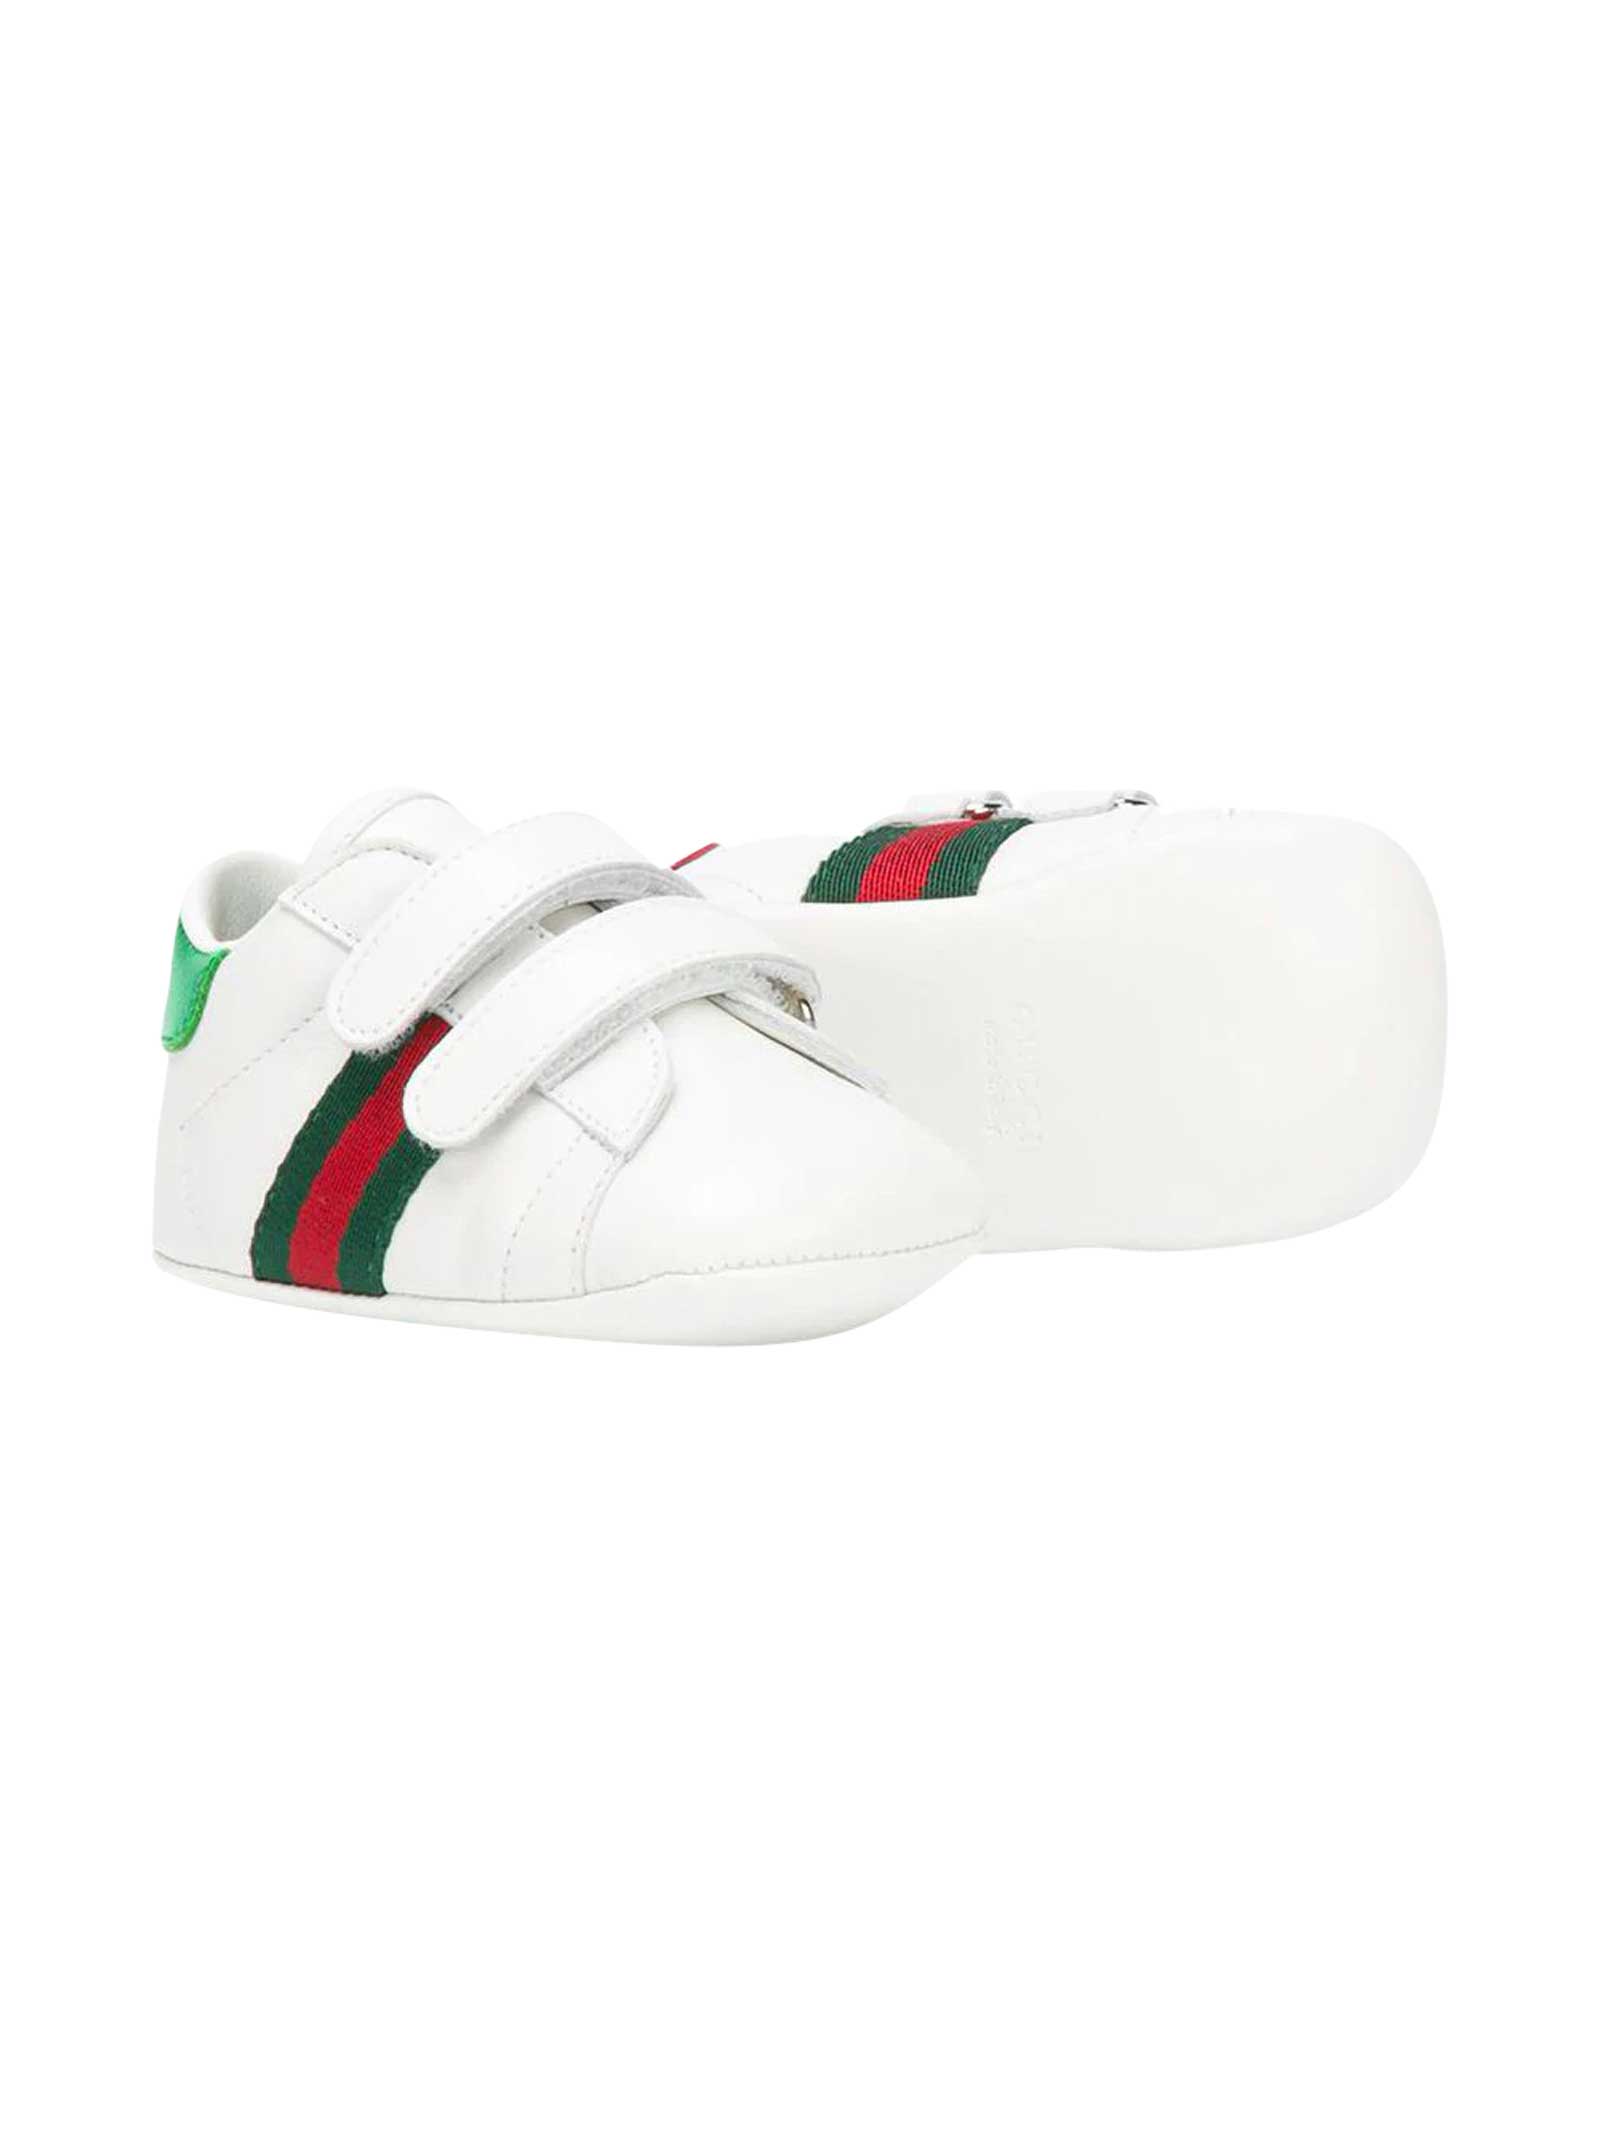 Gucci Shoes | italist, ALWAYS LIKE A SALE